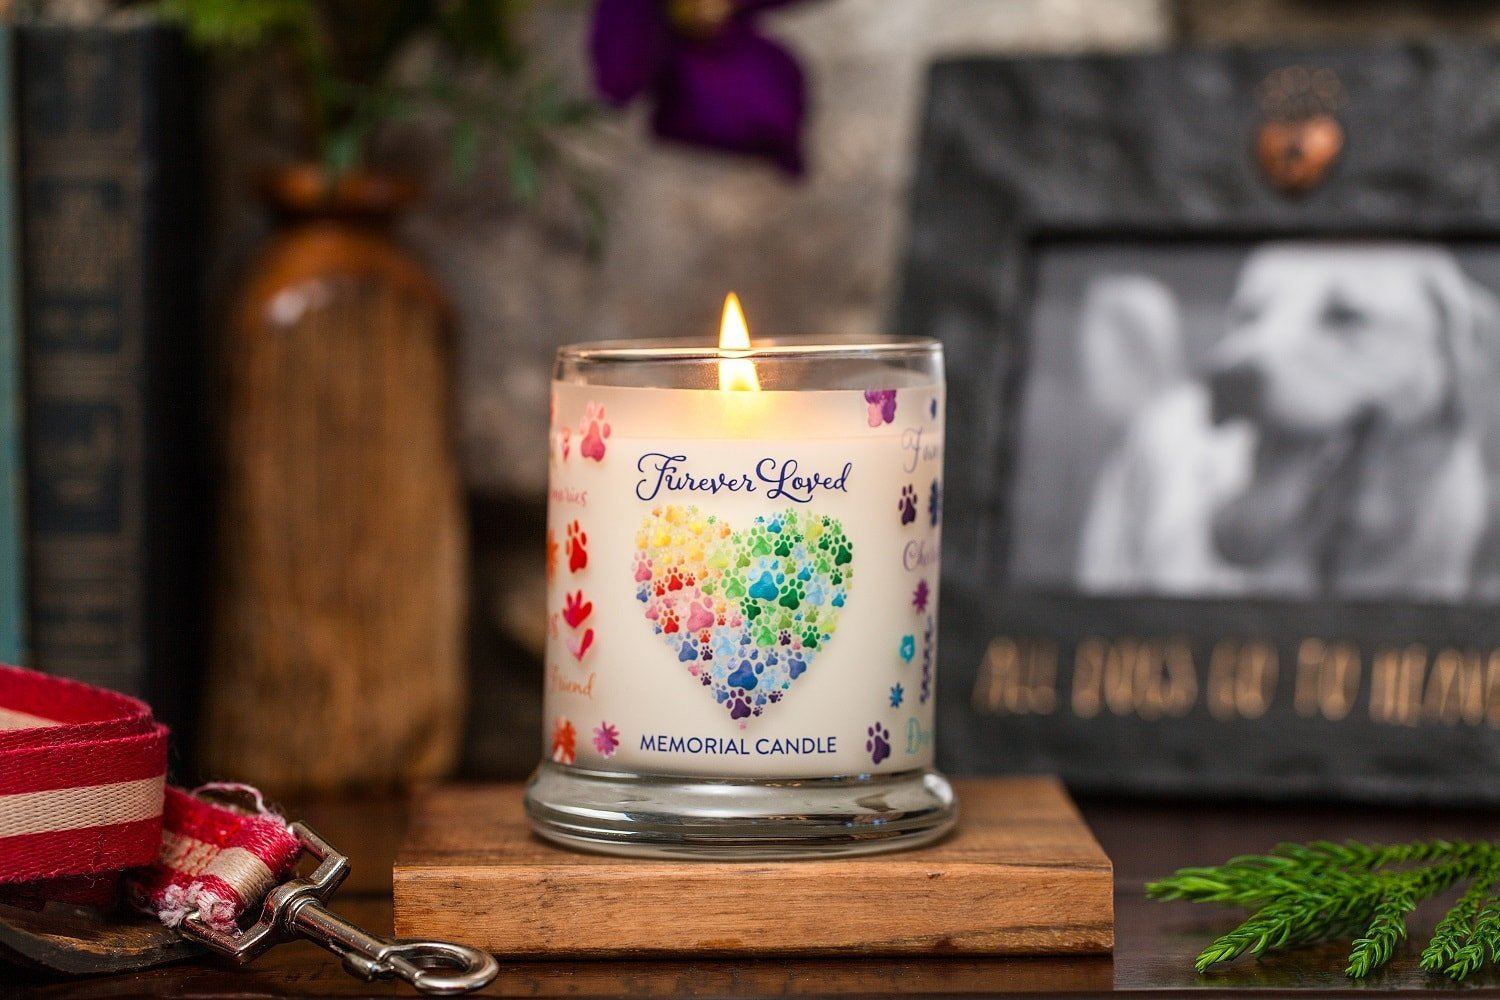 Pet House Candle Memorial